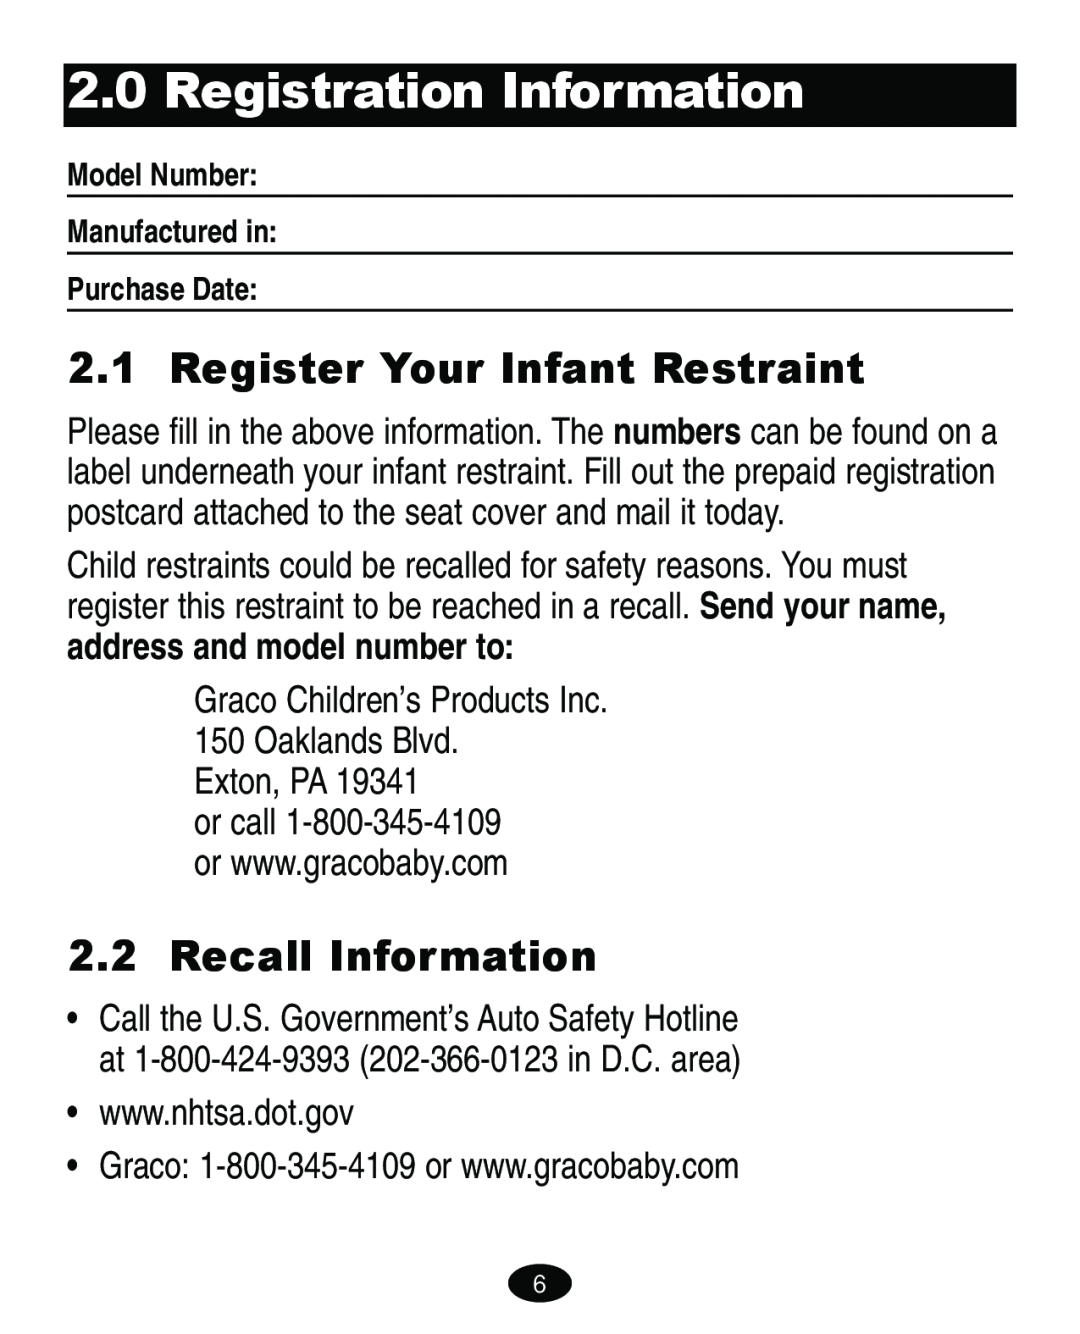 Graco ISPA109AC manual Registration Information, Register Your Infant Restraint, Recall Information, Exton, PA 